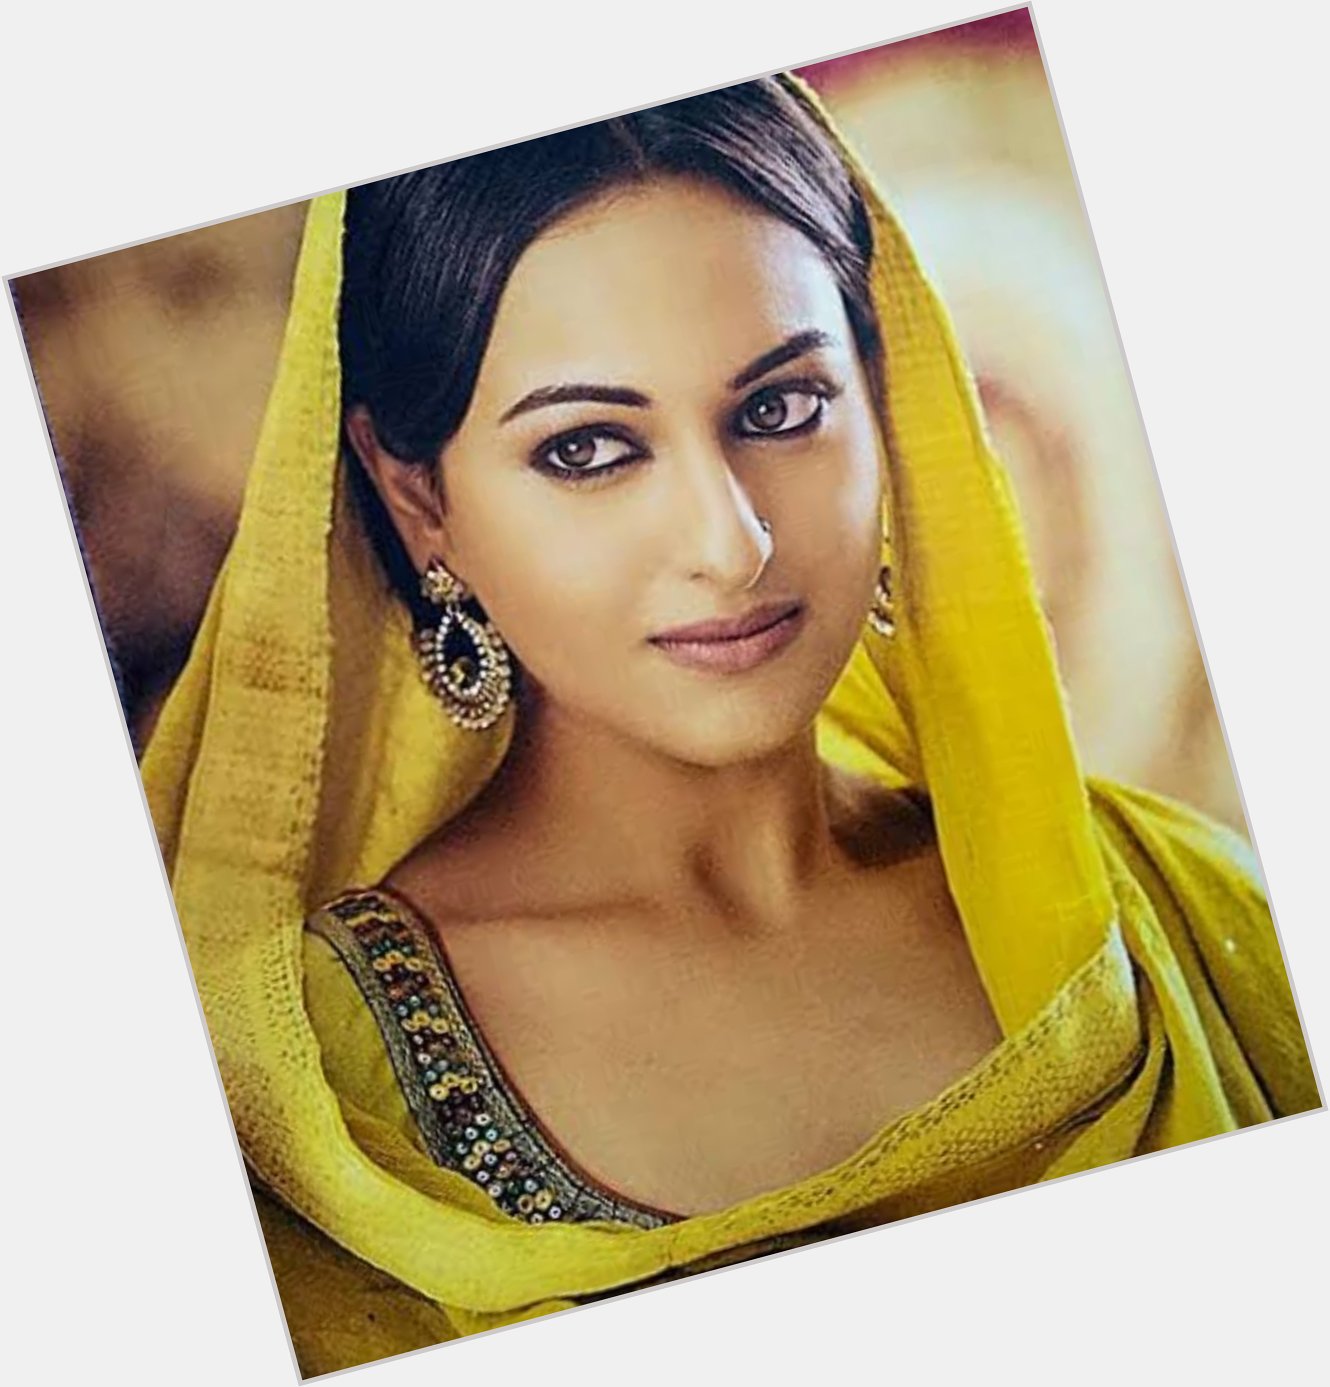 # happy birthday to most beautiful daughter of a most talented father, happy birthday to Sonakshi Sinha 